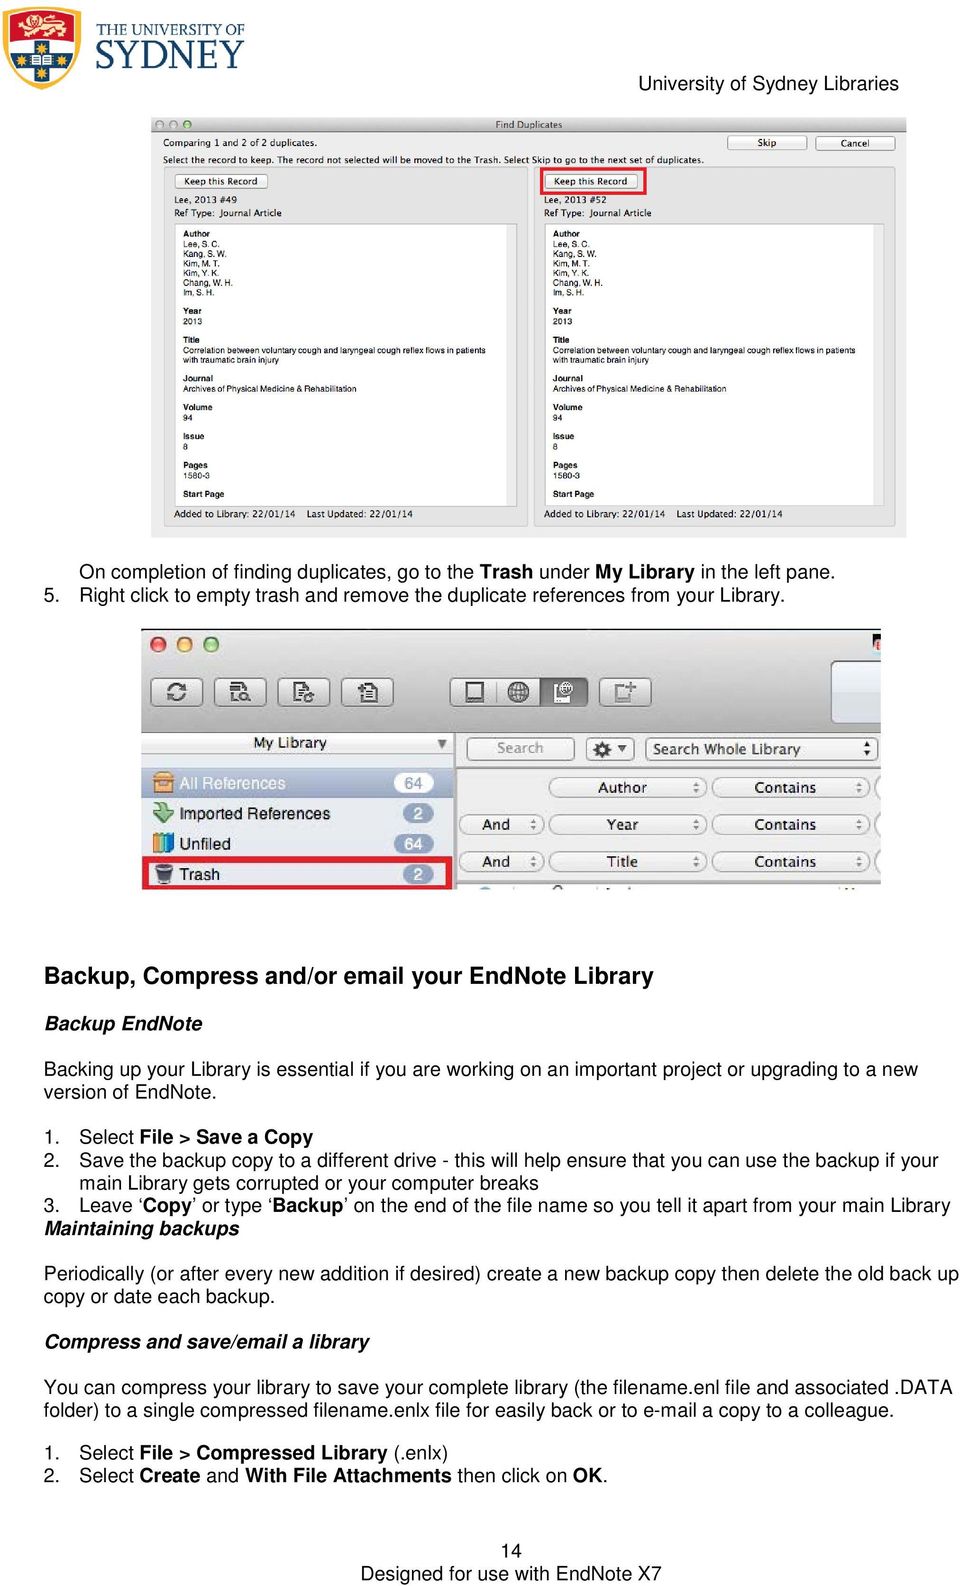 Select File > Save a Copy 2. Save the backup copy to a different drive - this will help ensure that you can use the backup if your main Library gets corrupted or your computer breaks 3.